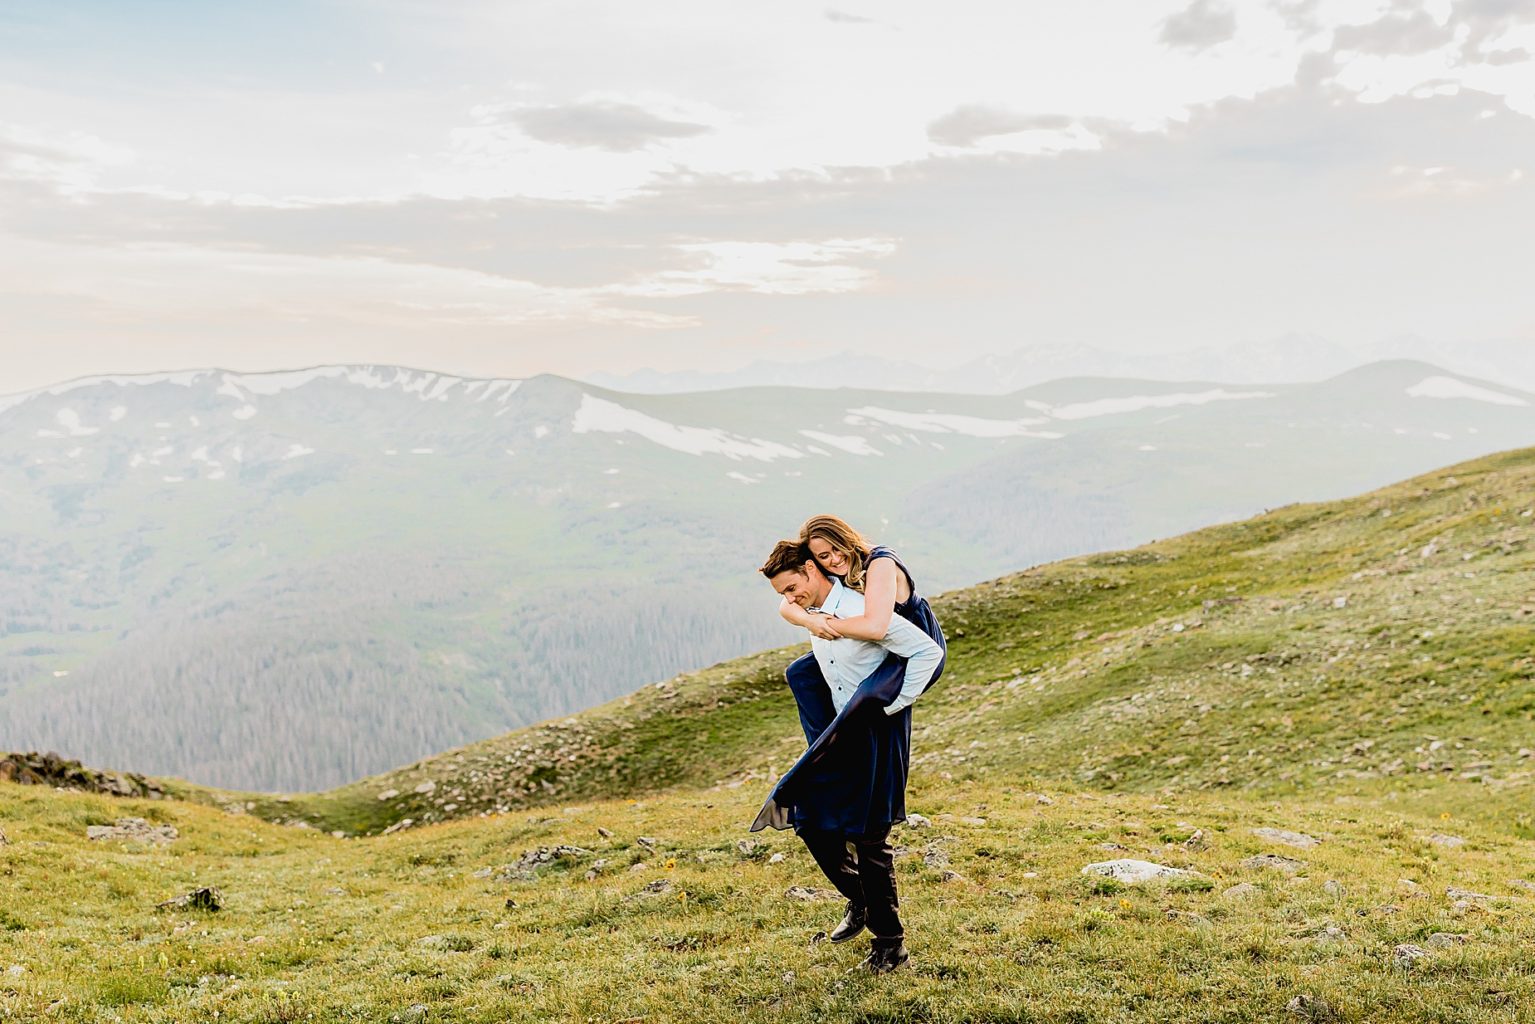 man gives woman piggyback ride in the green summer grass with mountain backdrop